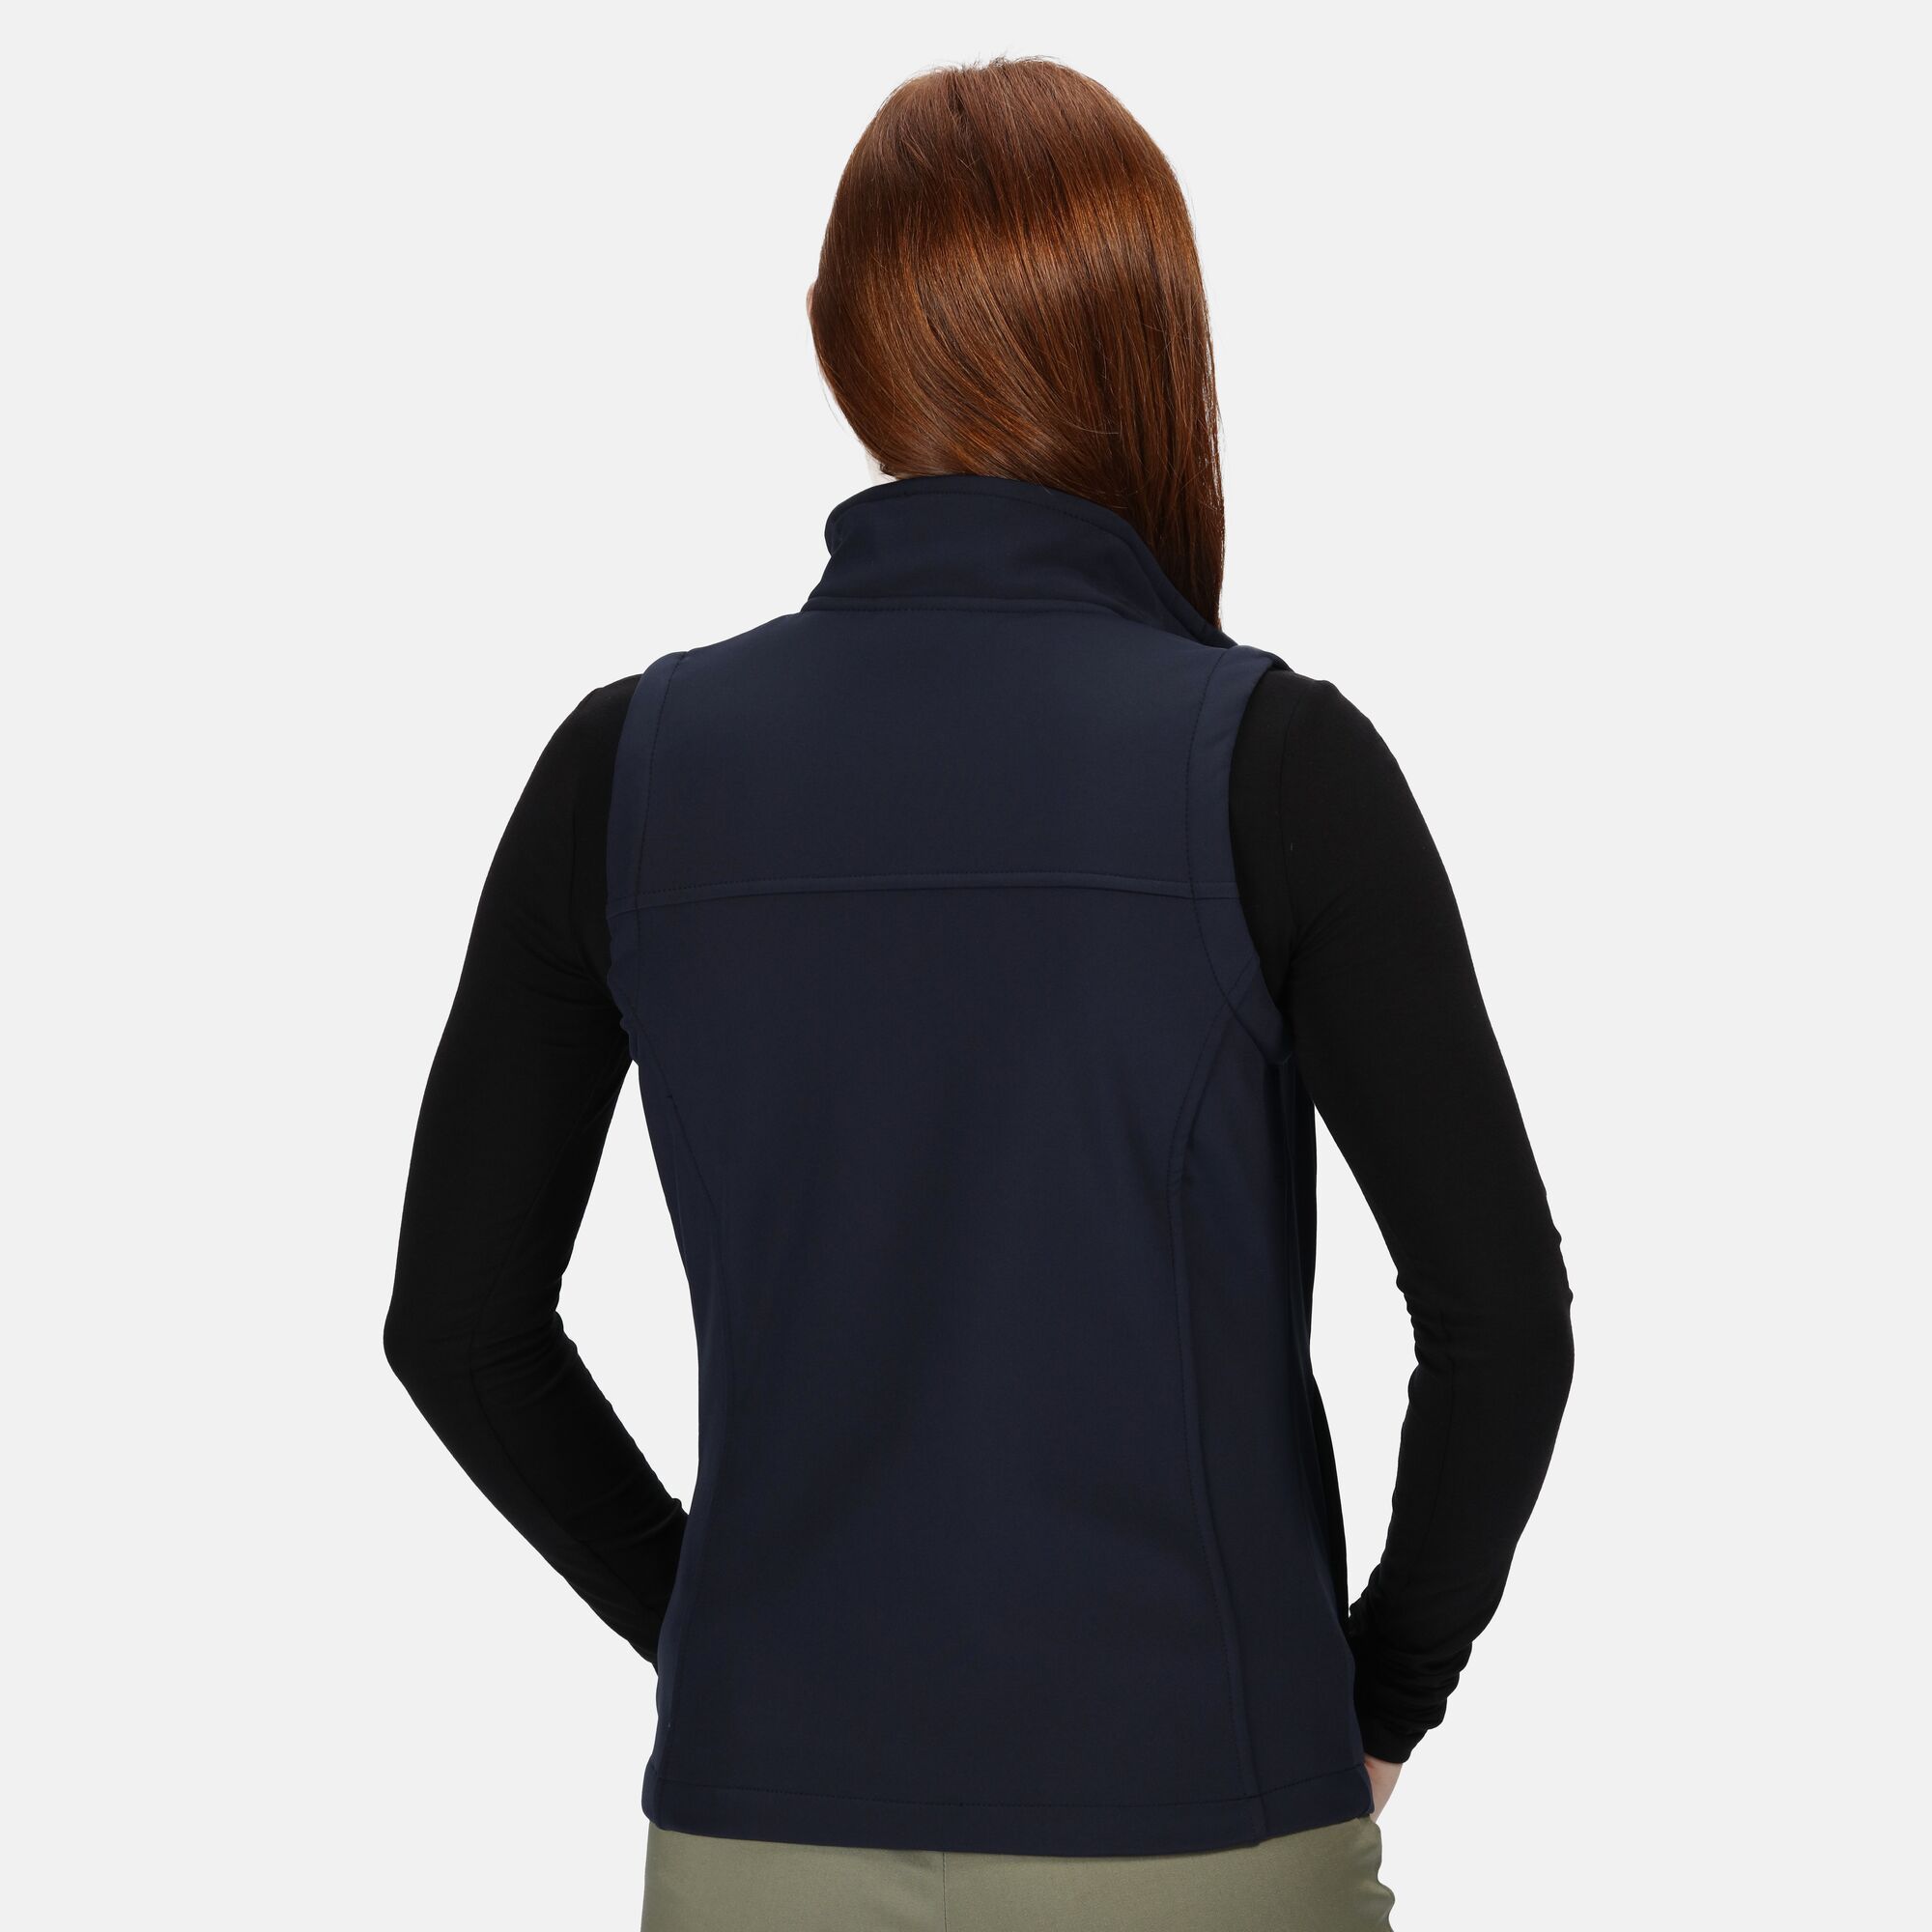 Warm backed woven stretch Softshell fabric in a durable water repellent finish. Wind resistant, quick drying and super soft handle. 2 zipped lower pockets and 1 zipped chest pocket. Lightweight and easy to wear in a shaped fit with adjustable shockcord hem. Regatta Womens sizing (bust approx): 6 (30in/76cm), 8 (32in/81cm), 10 (34in/86cm), 12 (36in/92cm), 14 (38in/97cm), 16 (40in/102cm), 18 (43in/109cm), 20 (45in/114cm), 22 (48in/122cm), 24 (50in/127cm), 26 (52in/132cm), 28 (54in/137cm), 30 (56in/142cm), 32 (58in/147cm), 34 (60in/152cm), 36 (62in/158cm). 96% polyester/4% elastane outer.